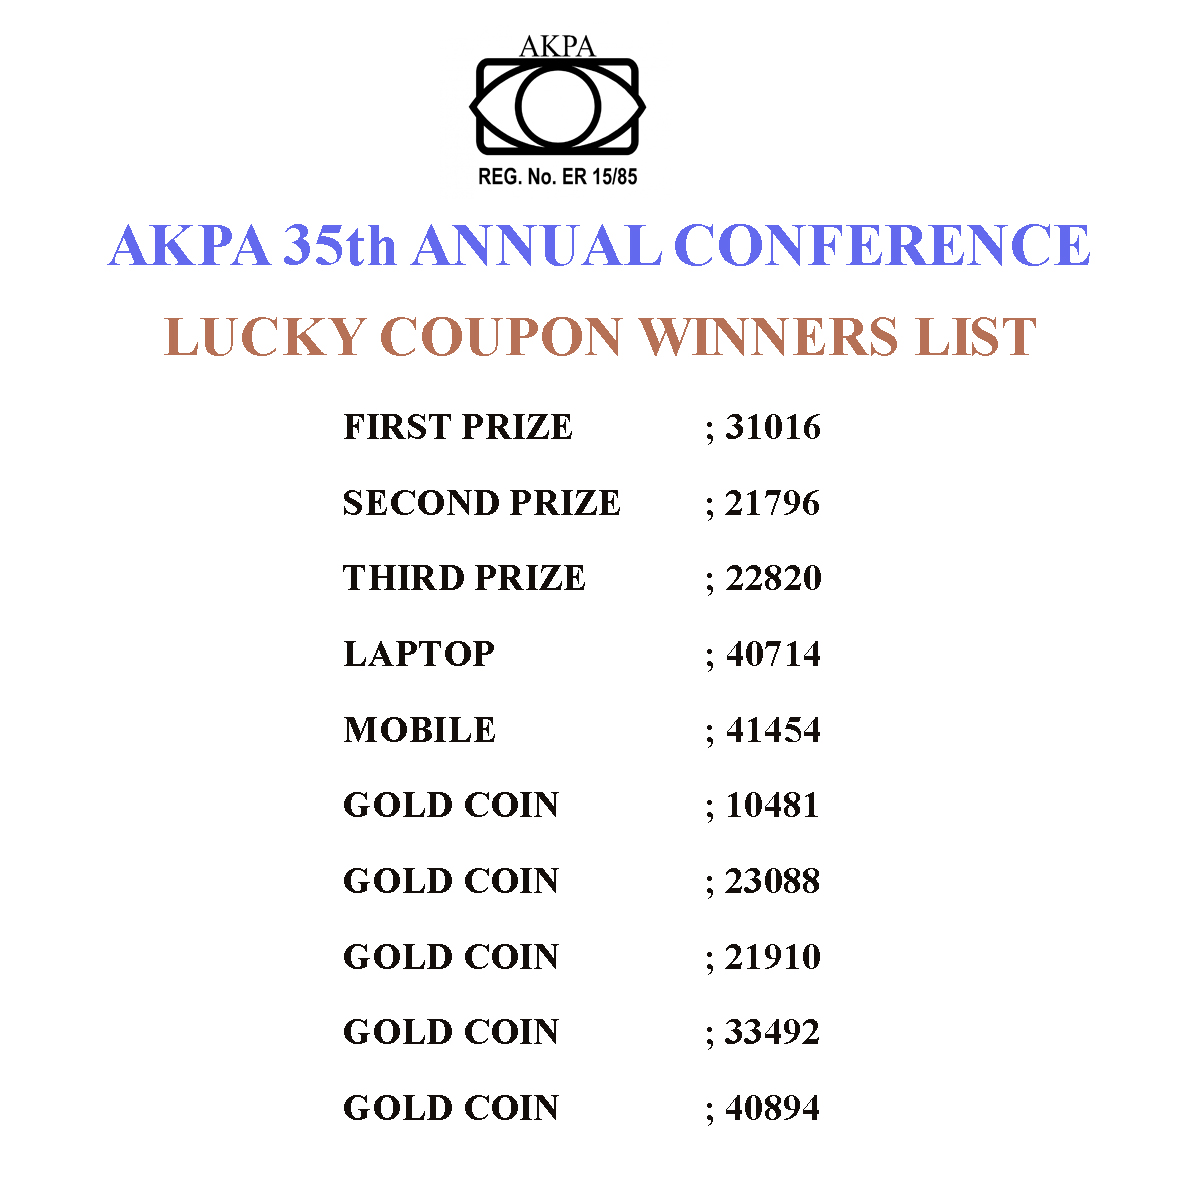 35th Annual Conference Lucky Coupon Winners List